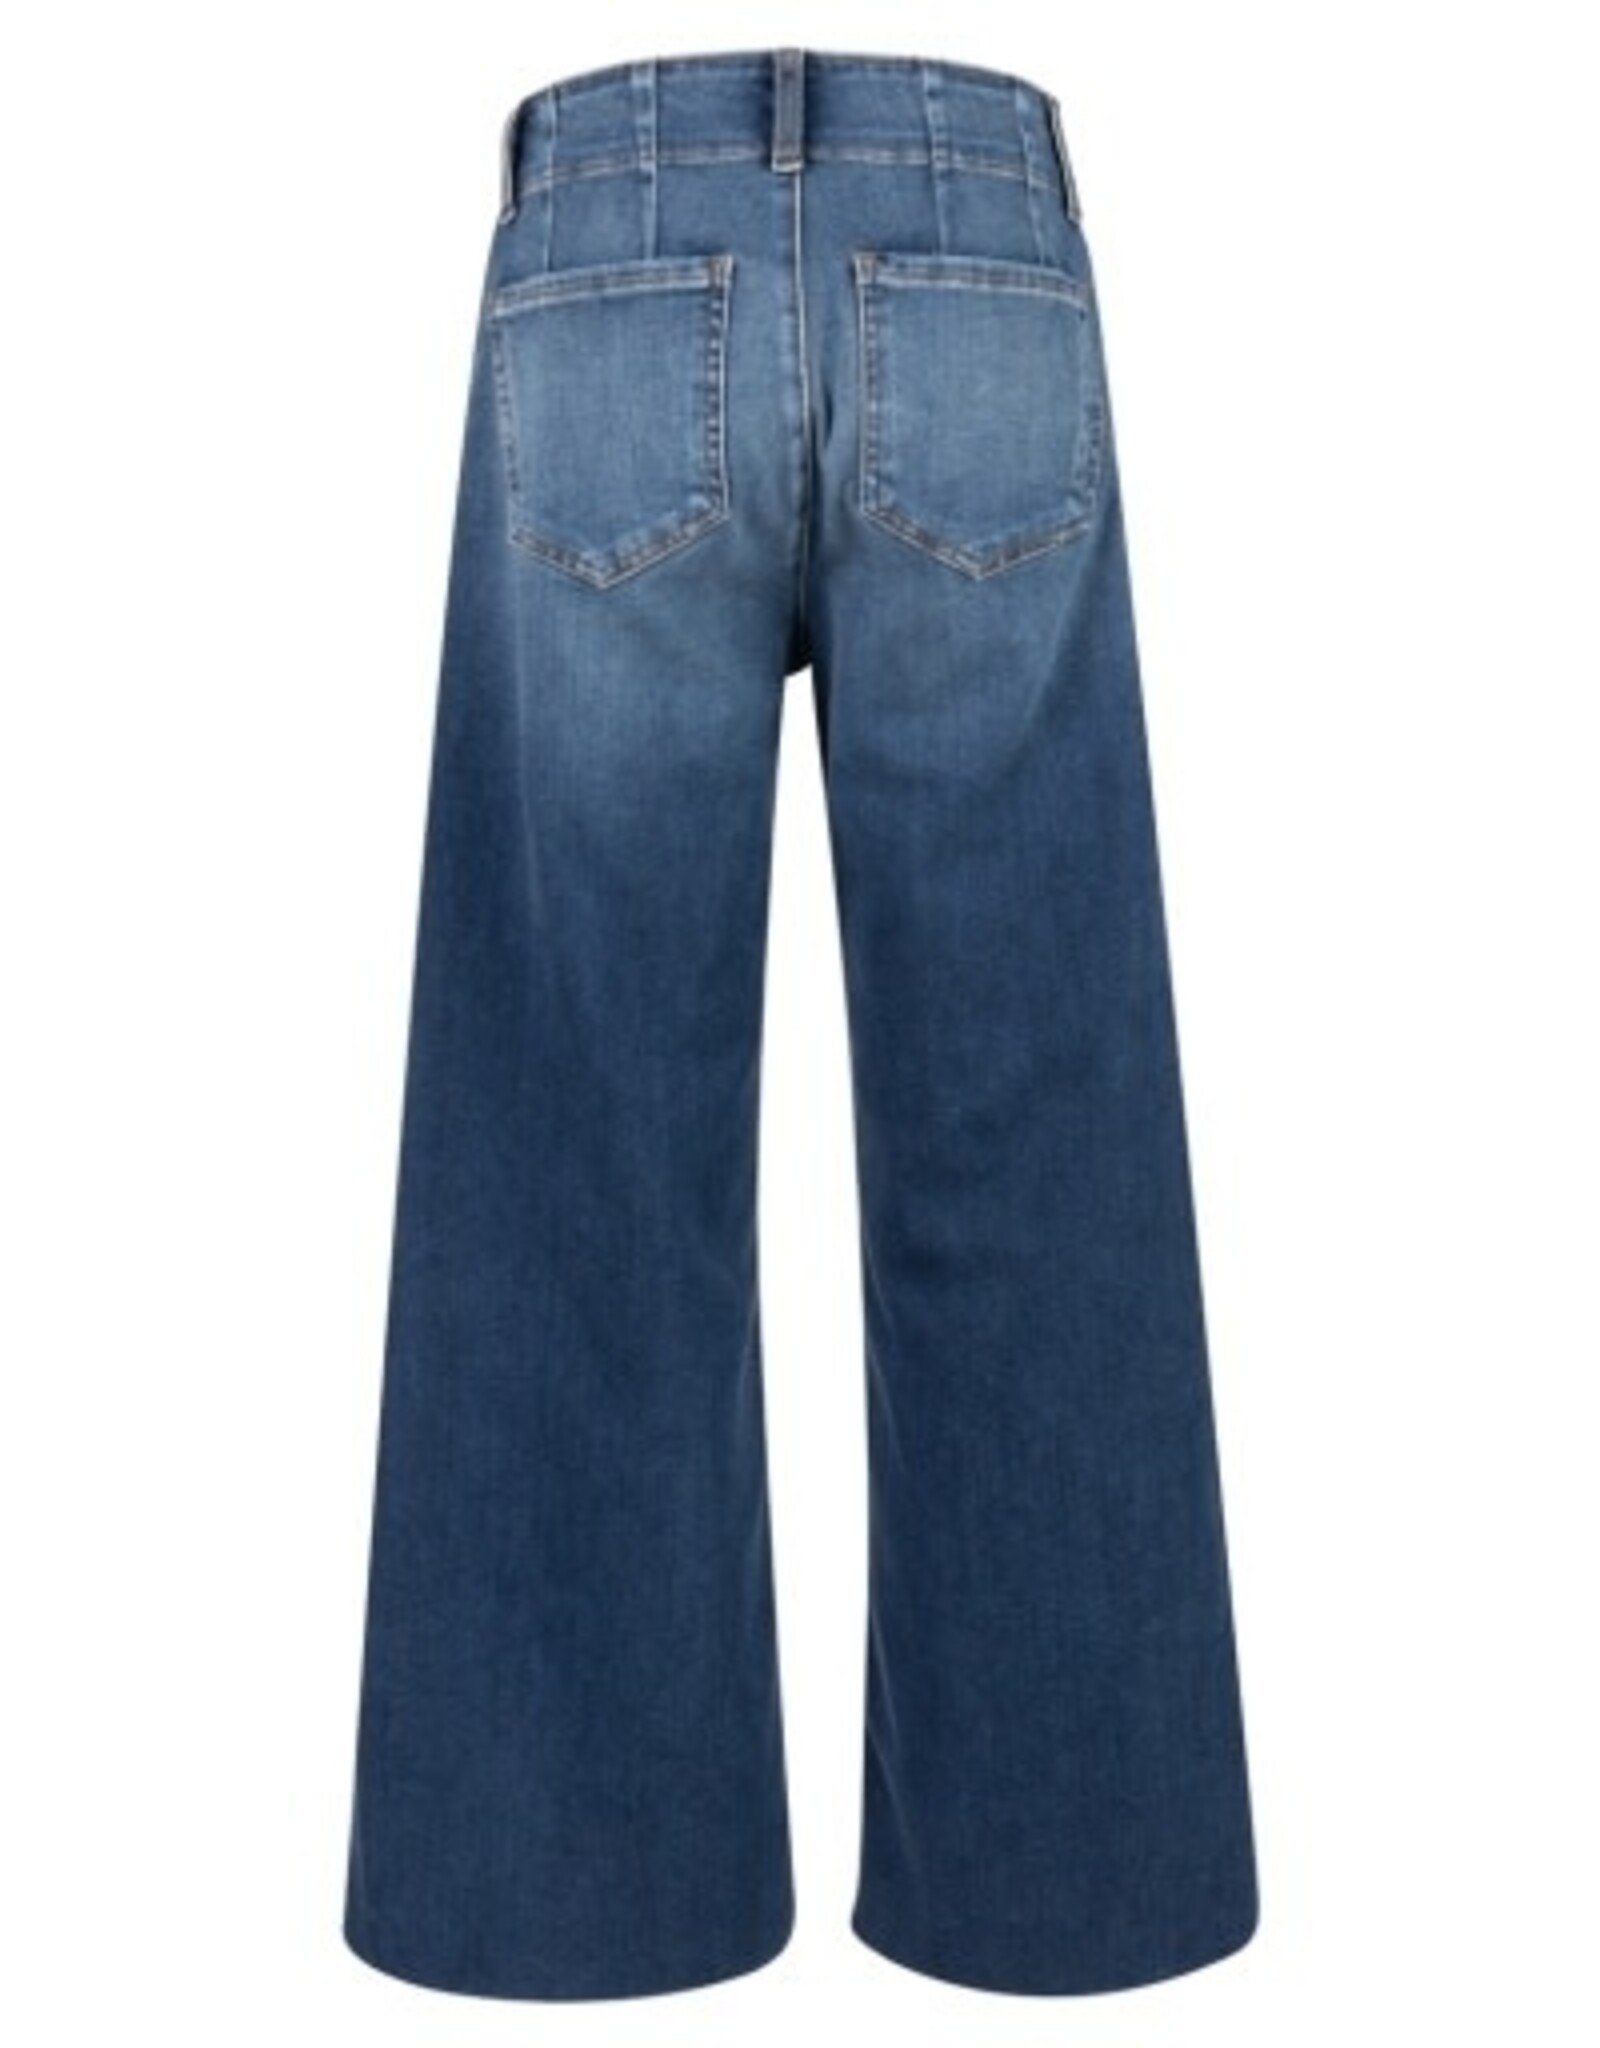 Kut from the Kloth / STS Blue Kut Meg Jeans